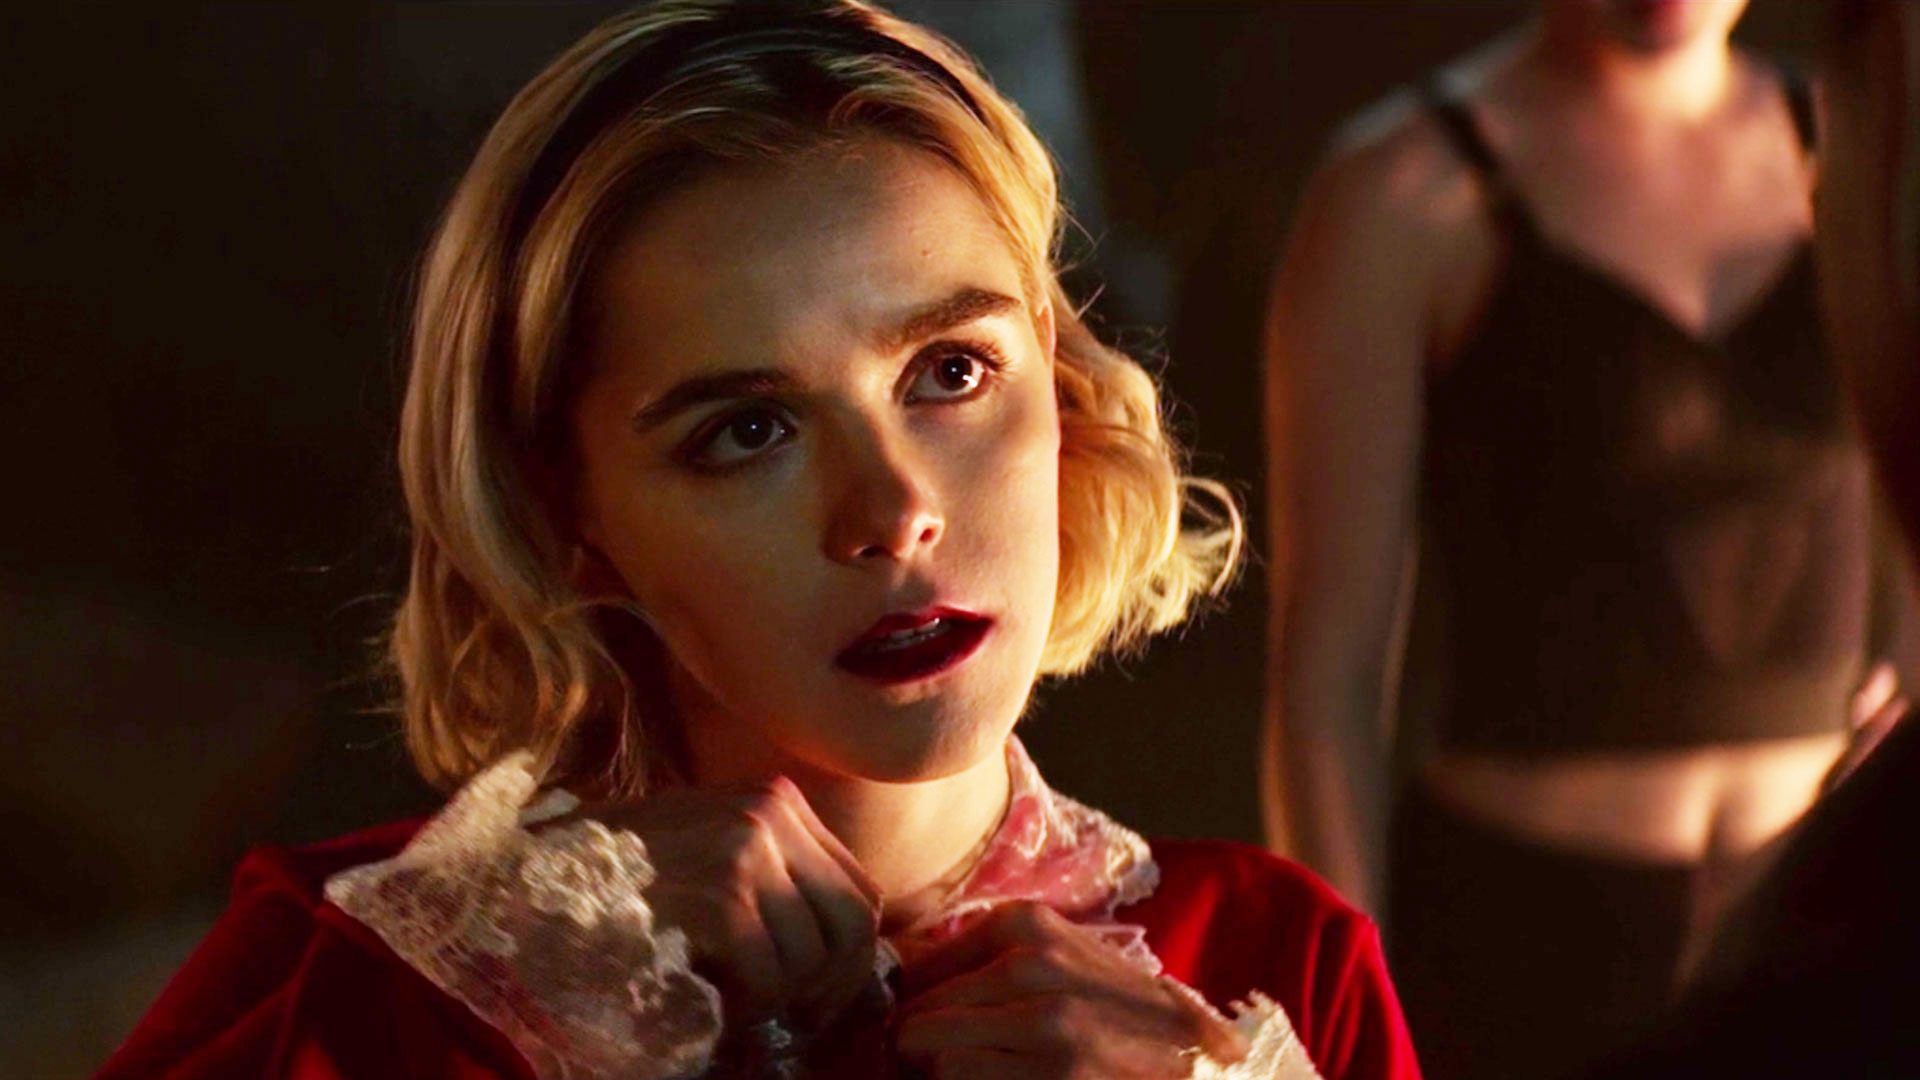 Chilling Adventures of Sabrina is coming back for Season 3 later this year